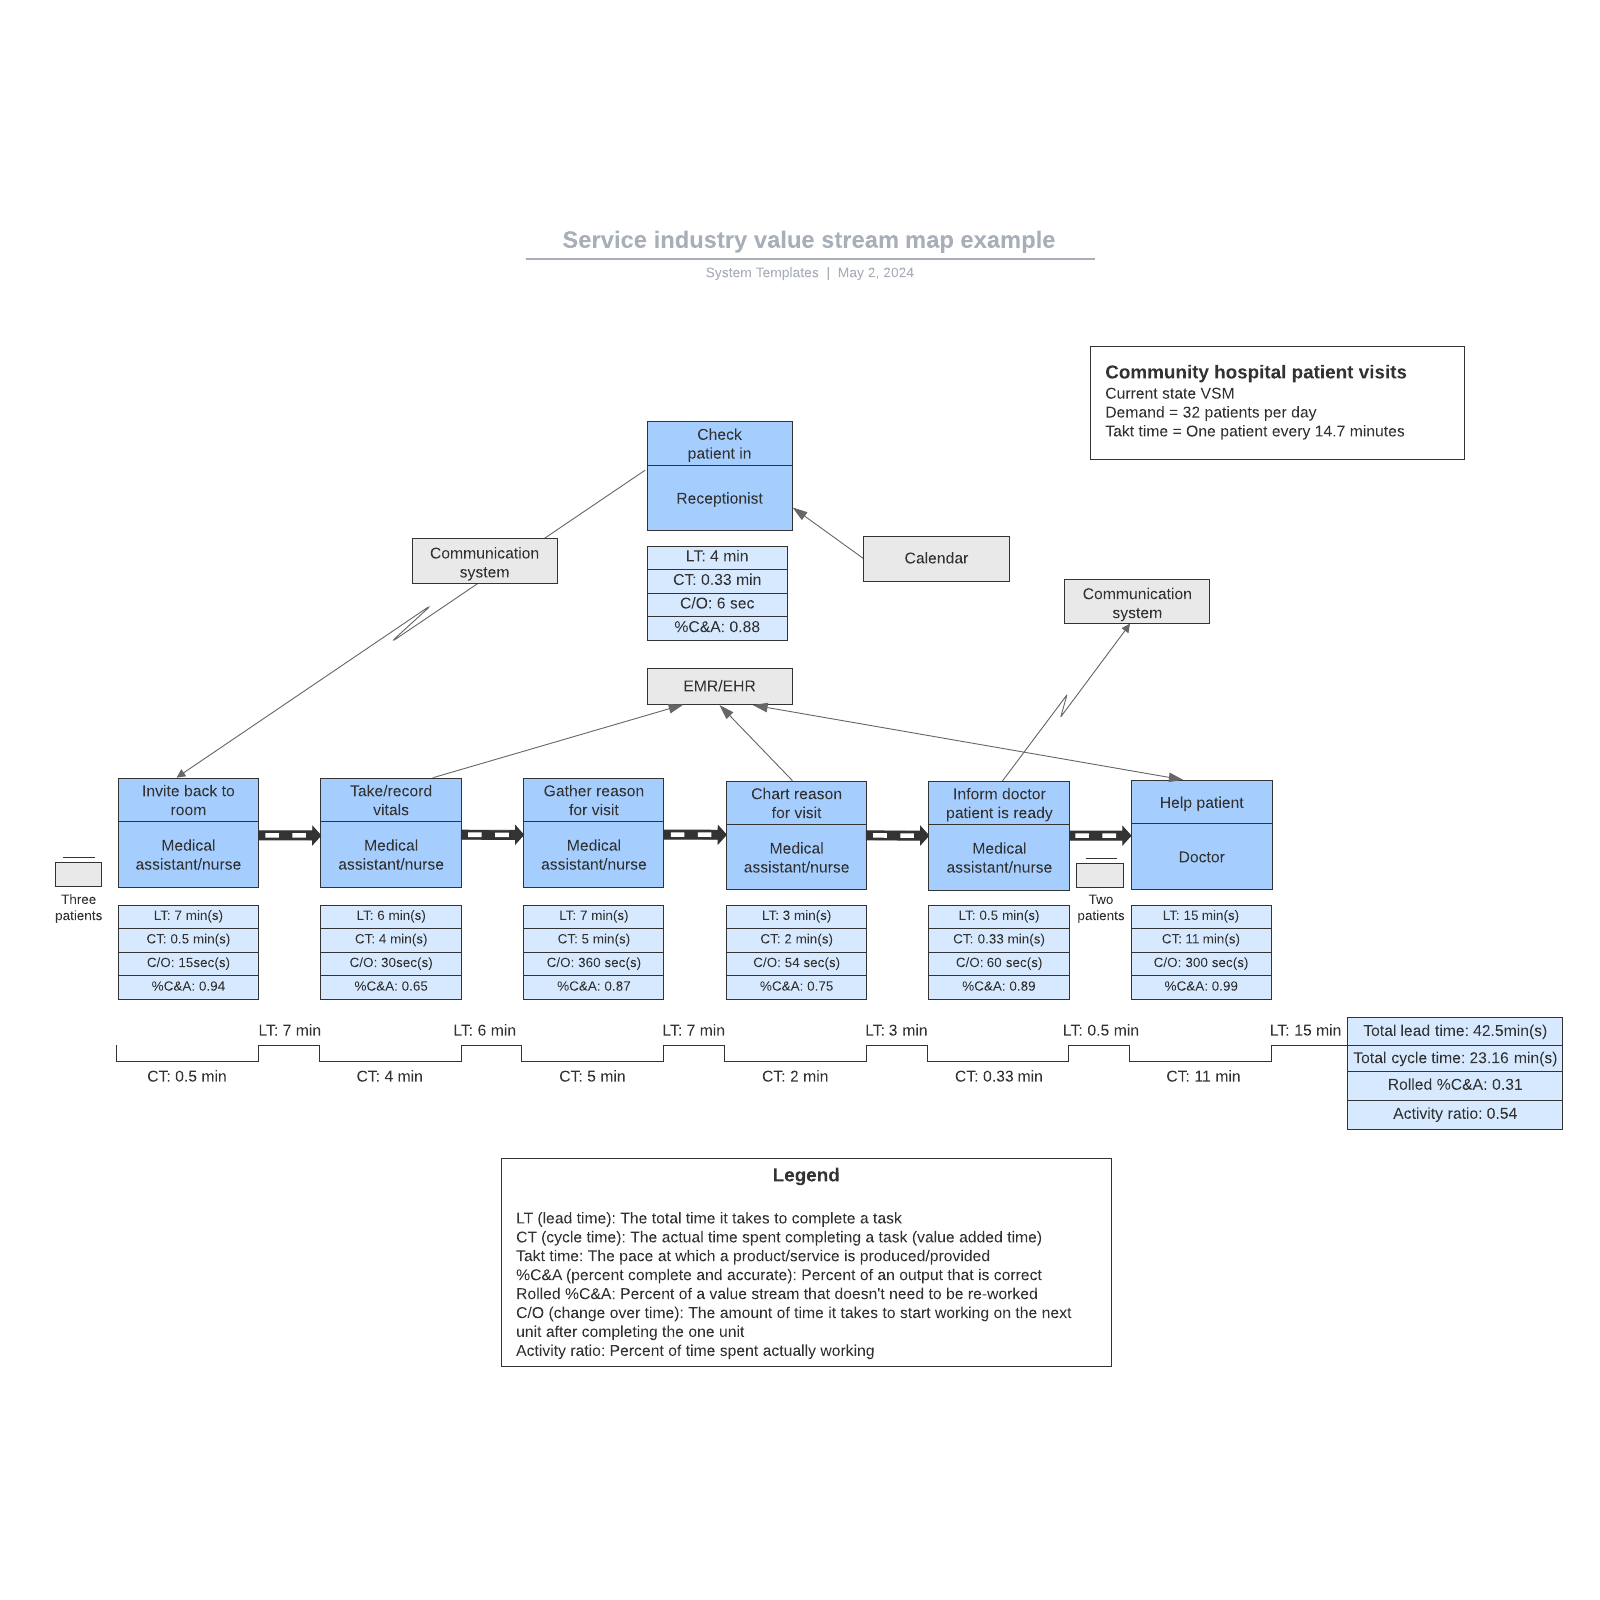 Service industry value stream map example example